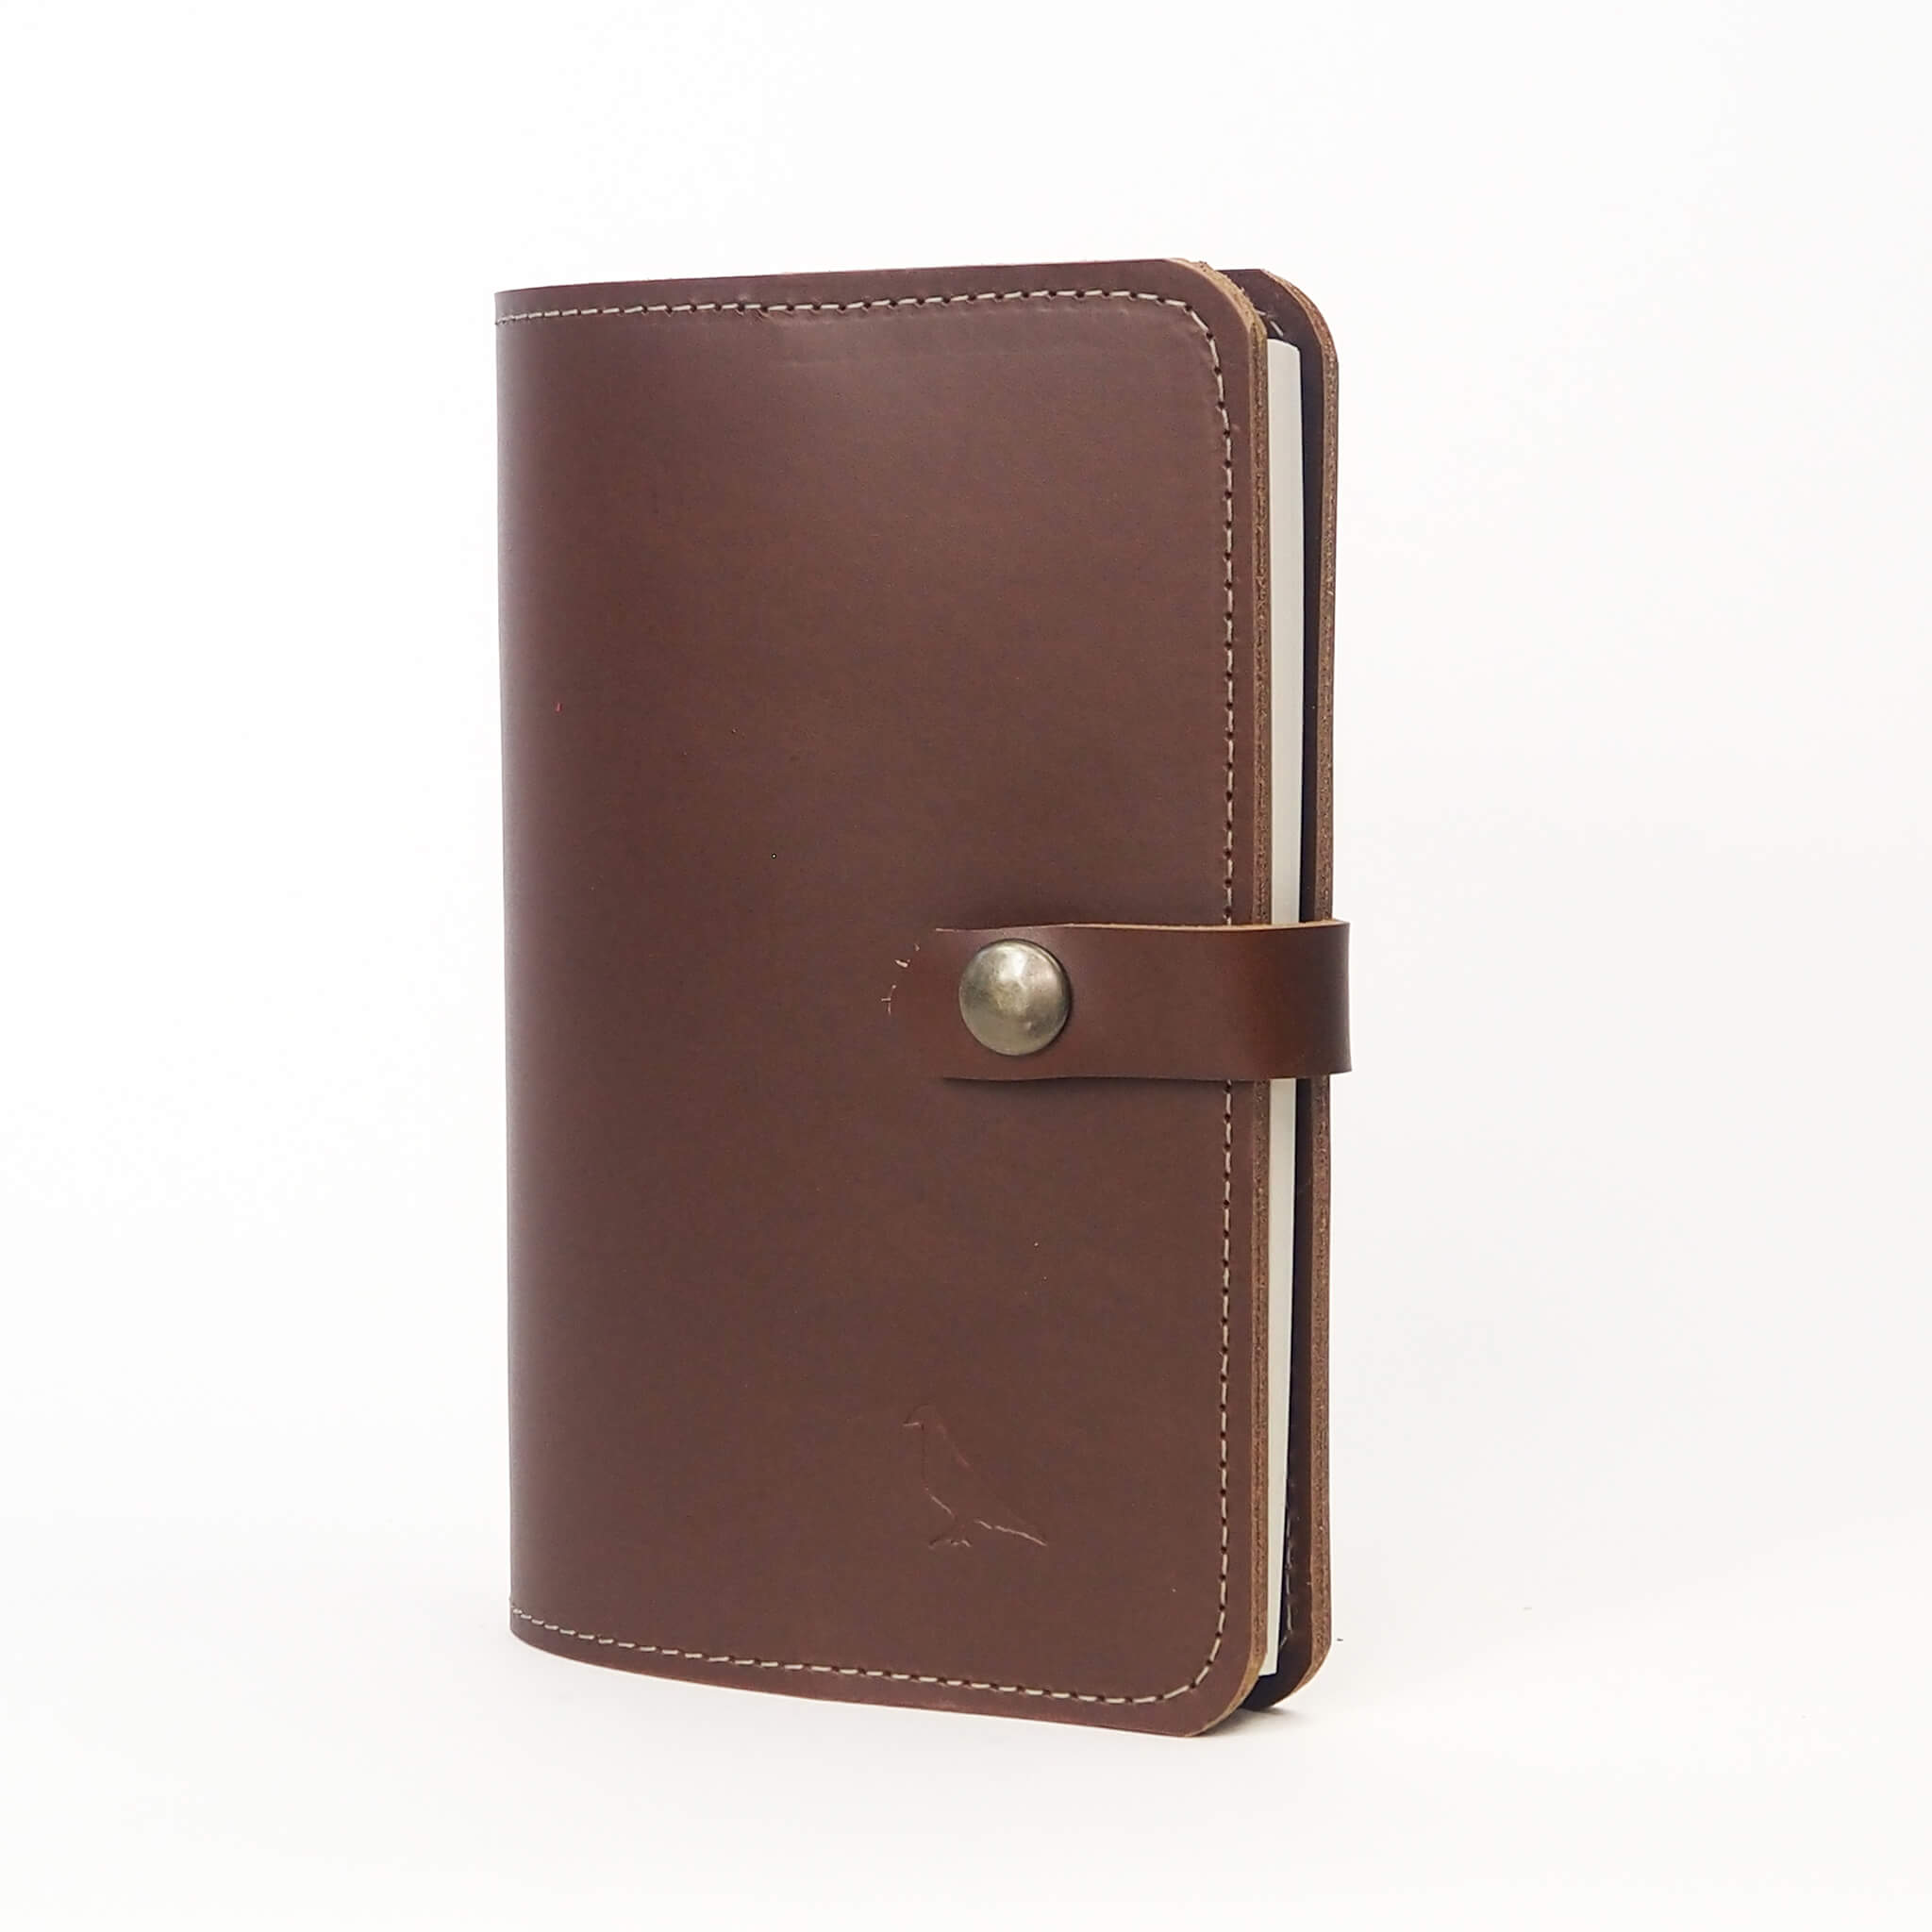 journal a6 - handmade leather - pecan front view